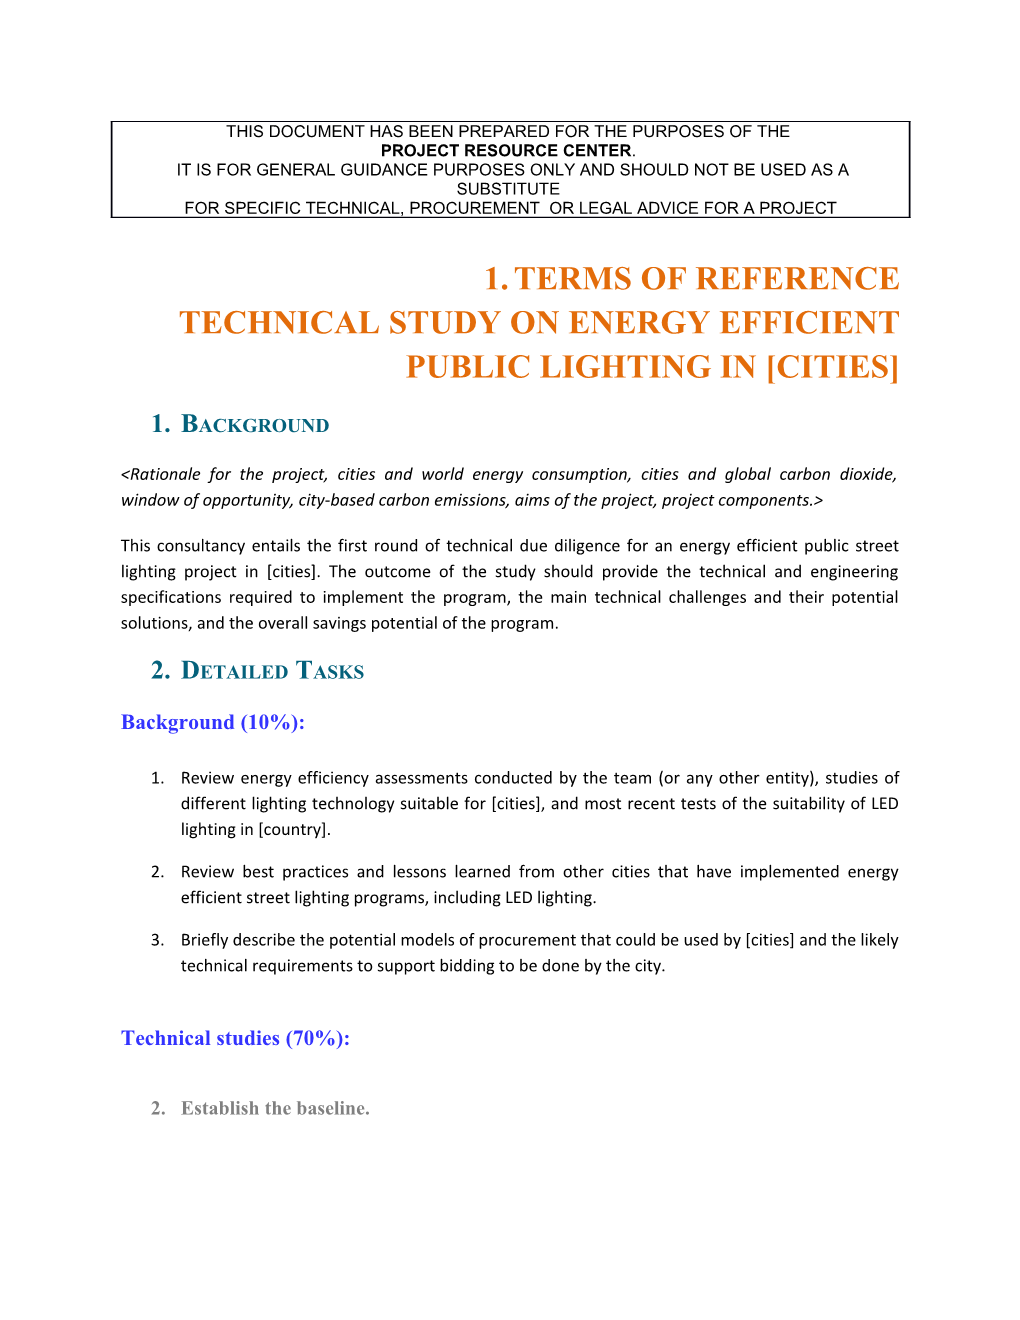 Technical Study on Energy Efficient Public Lighting in Cities